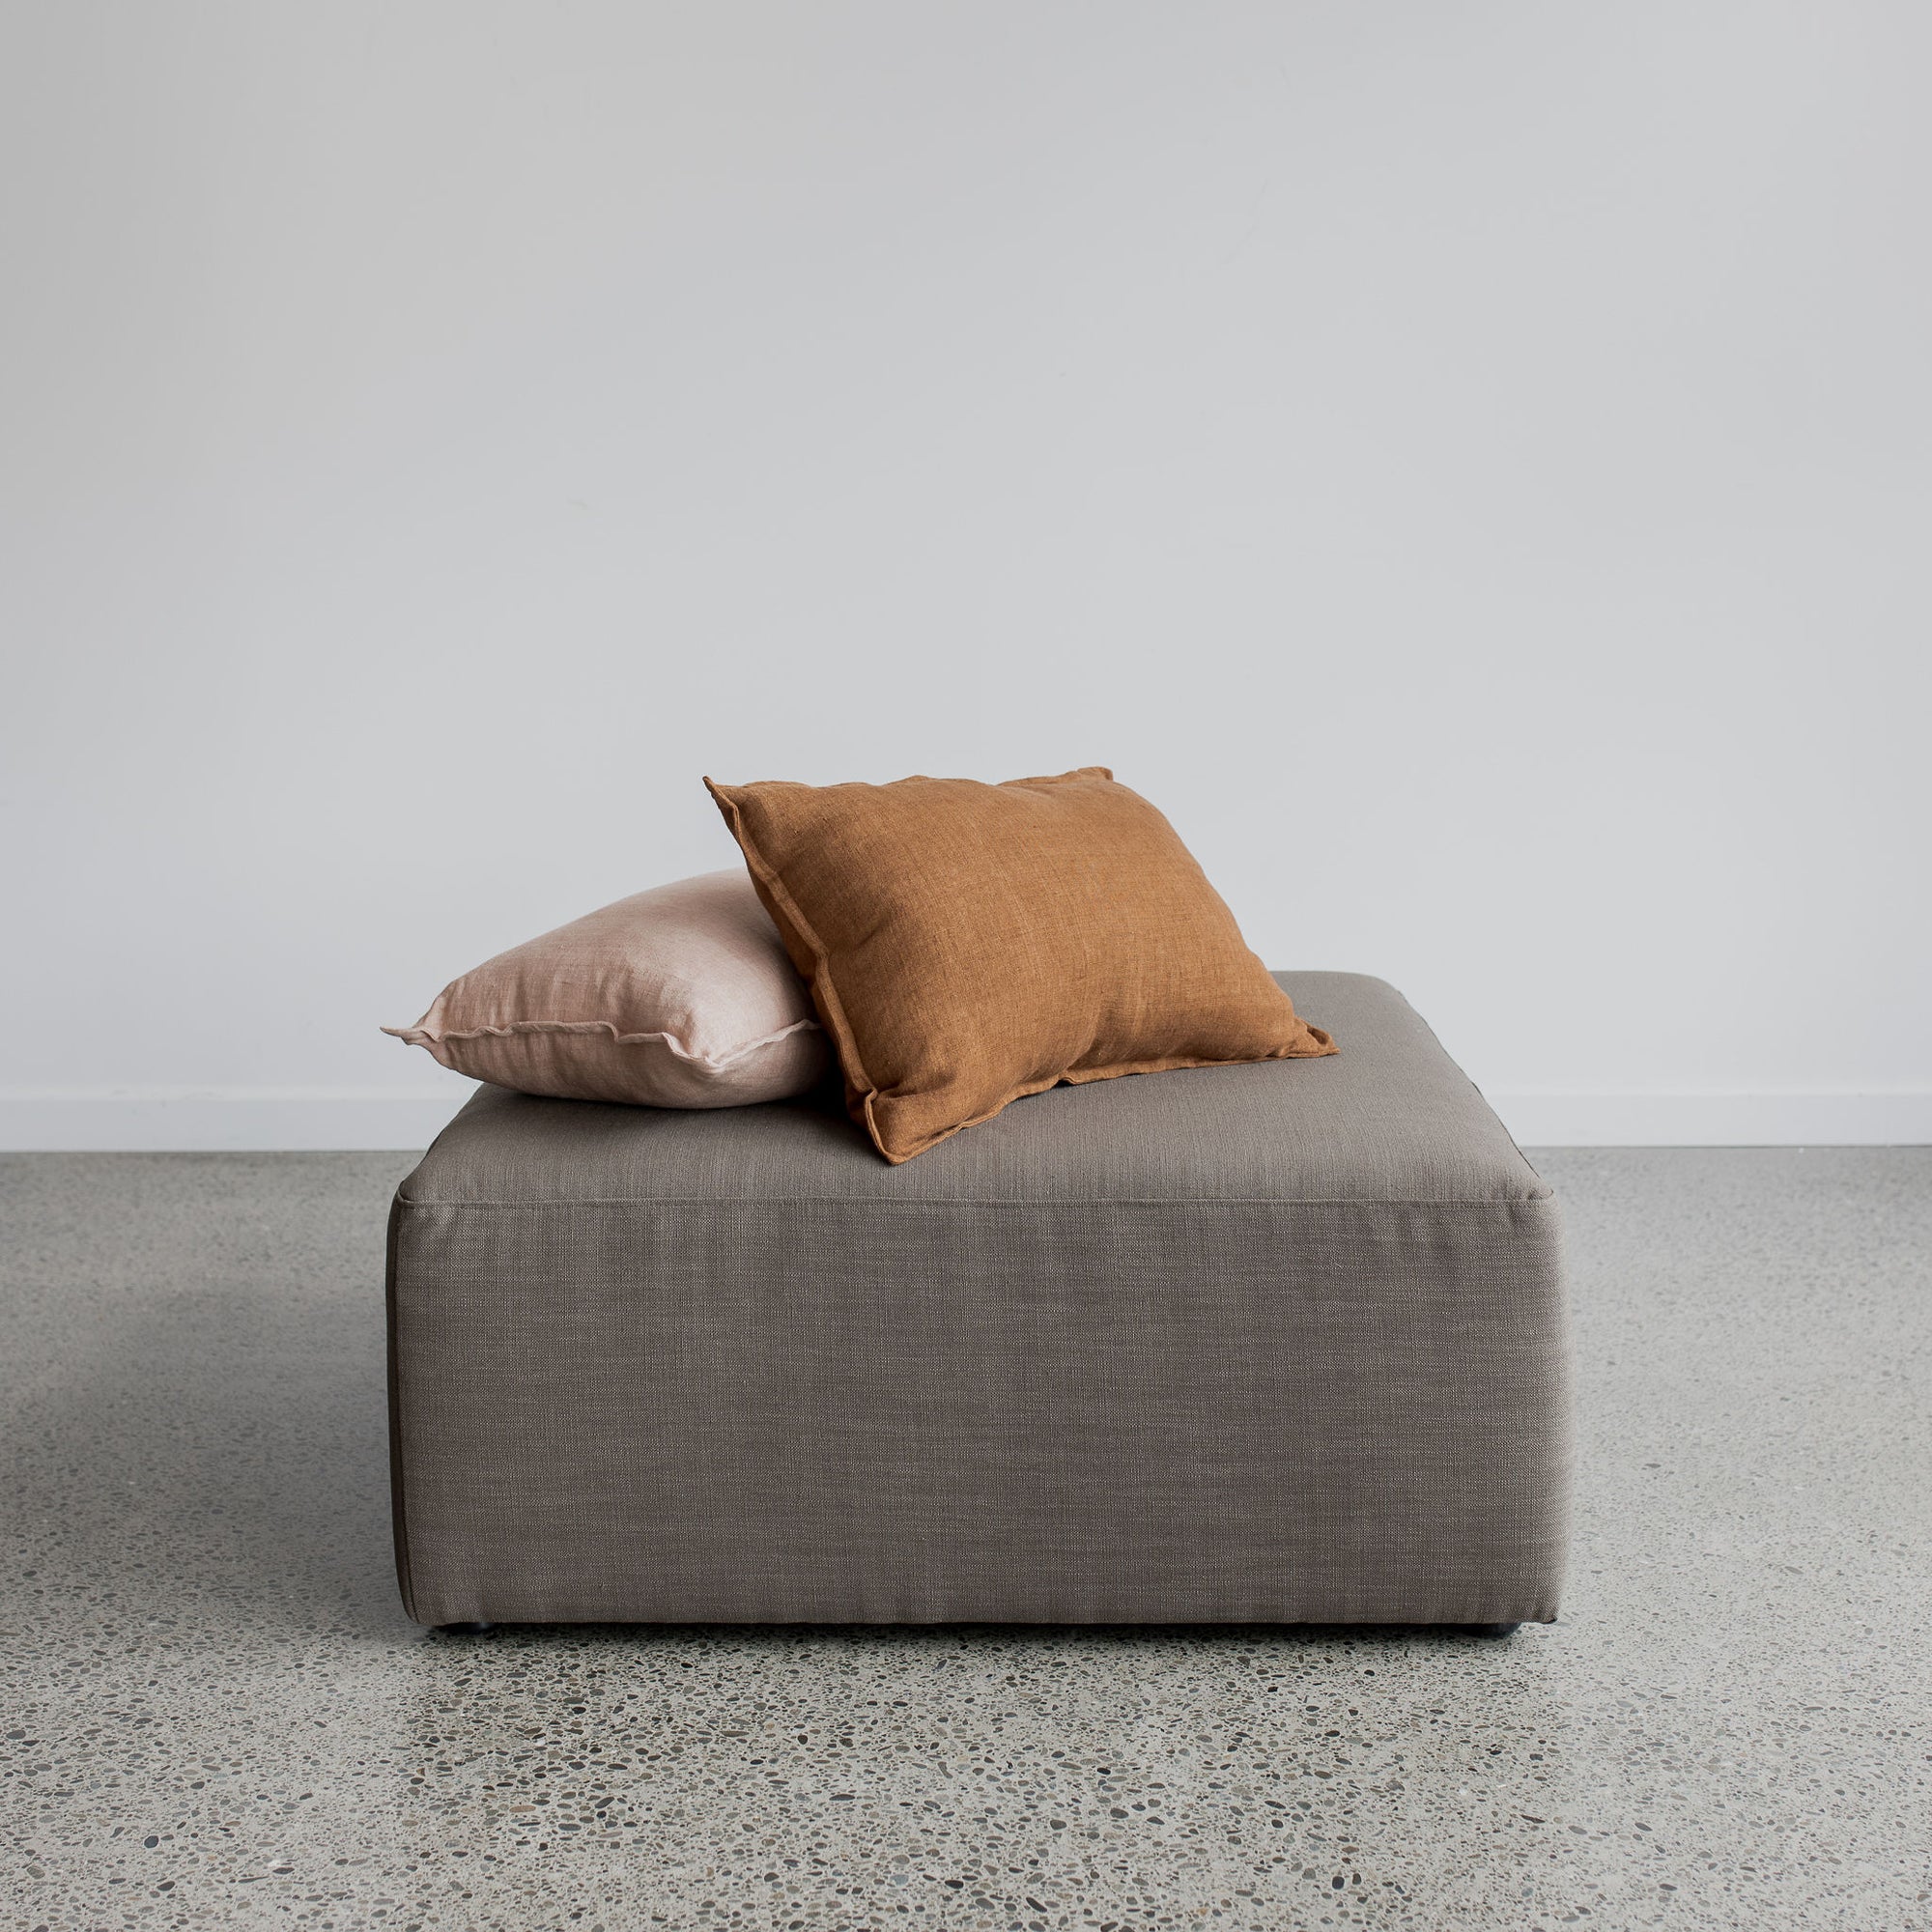 sunset floating fabric upholstered footstool ottoman from corcovado furniture store auckland christchurch new zealandsunset floating fabric upholstered footstool ottoman from corcovado furniture store auckland christchurch new zealand